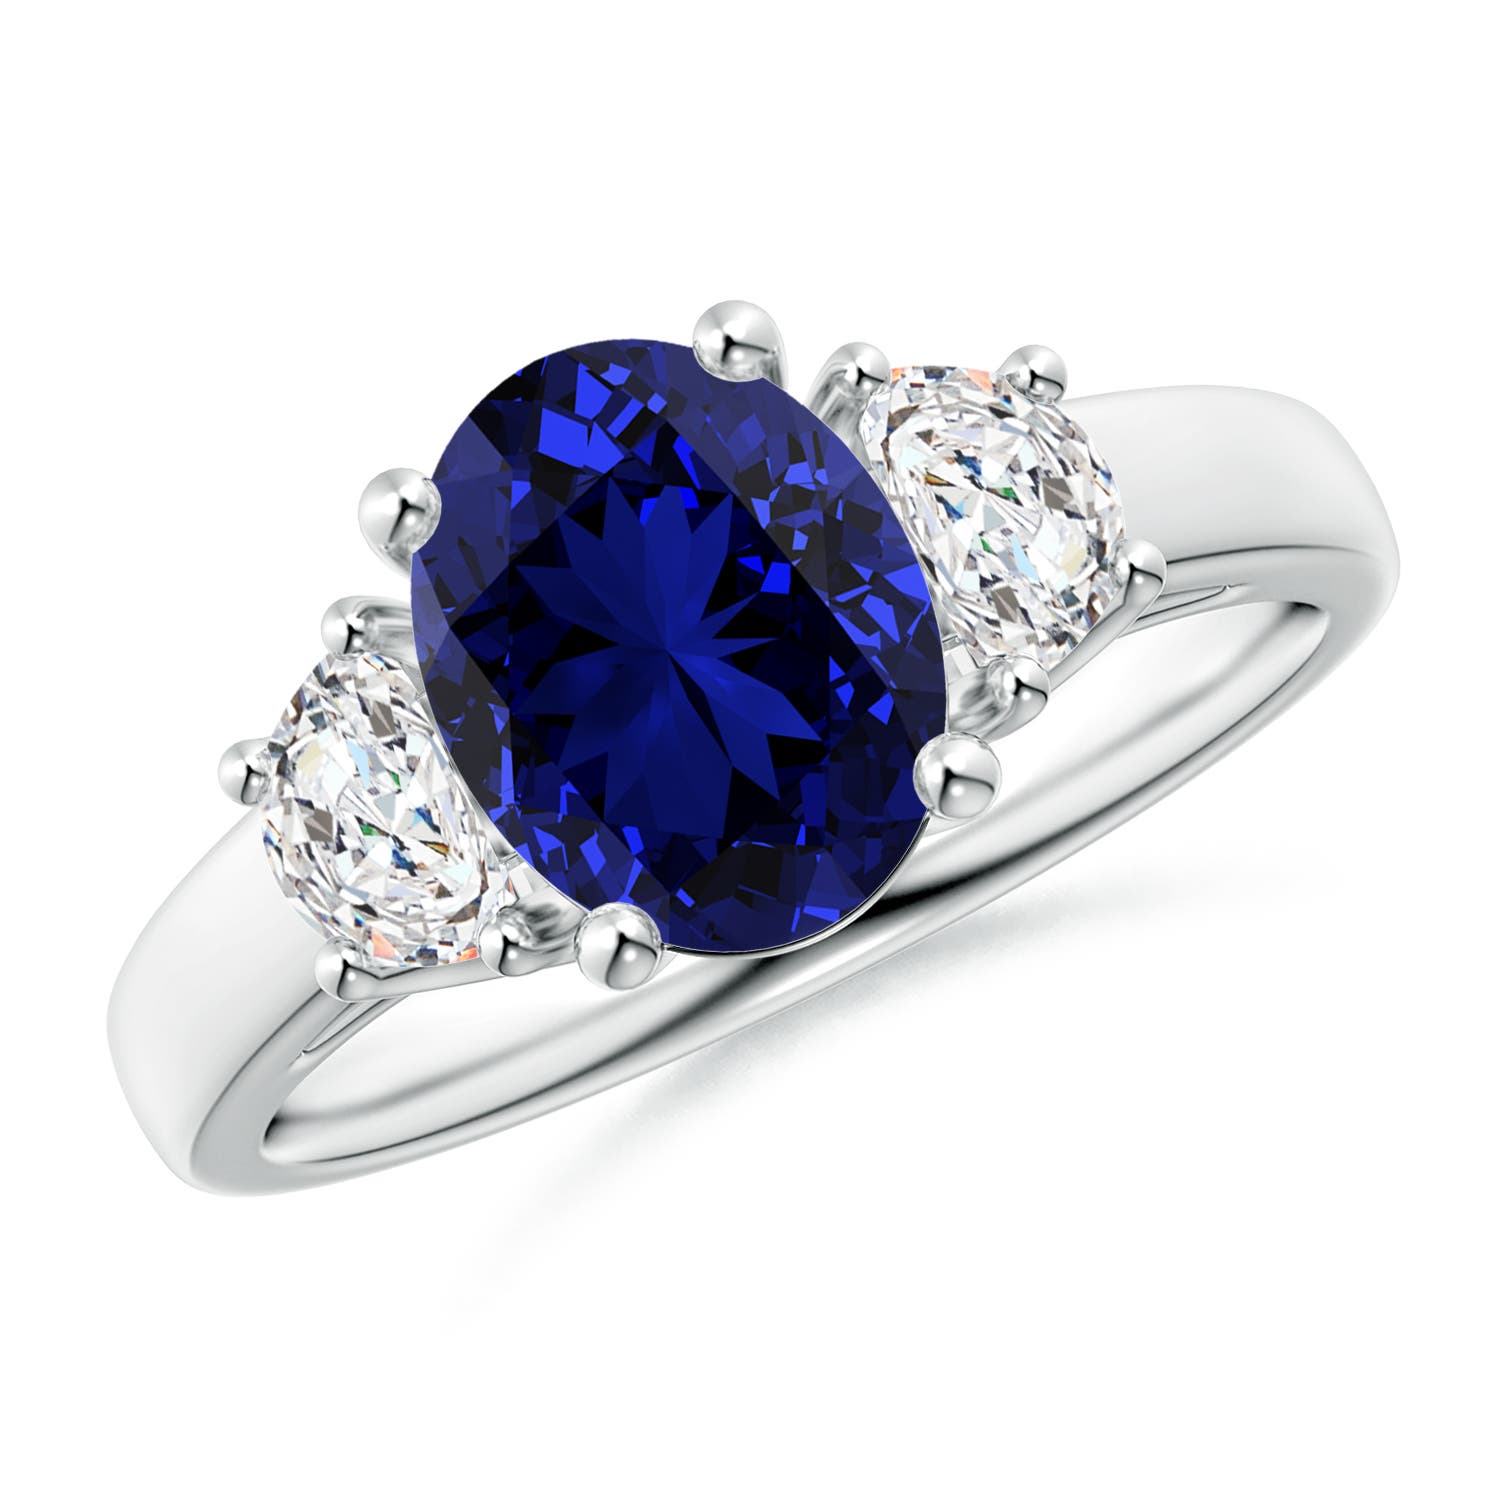 THREE STONE RING WITH SAPPHIRE CENTER STONE - Mouradian Jewelry